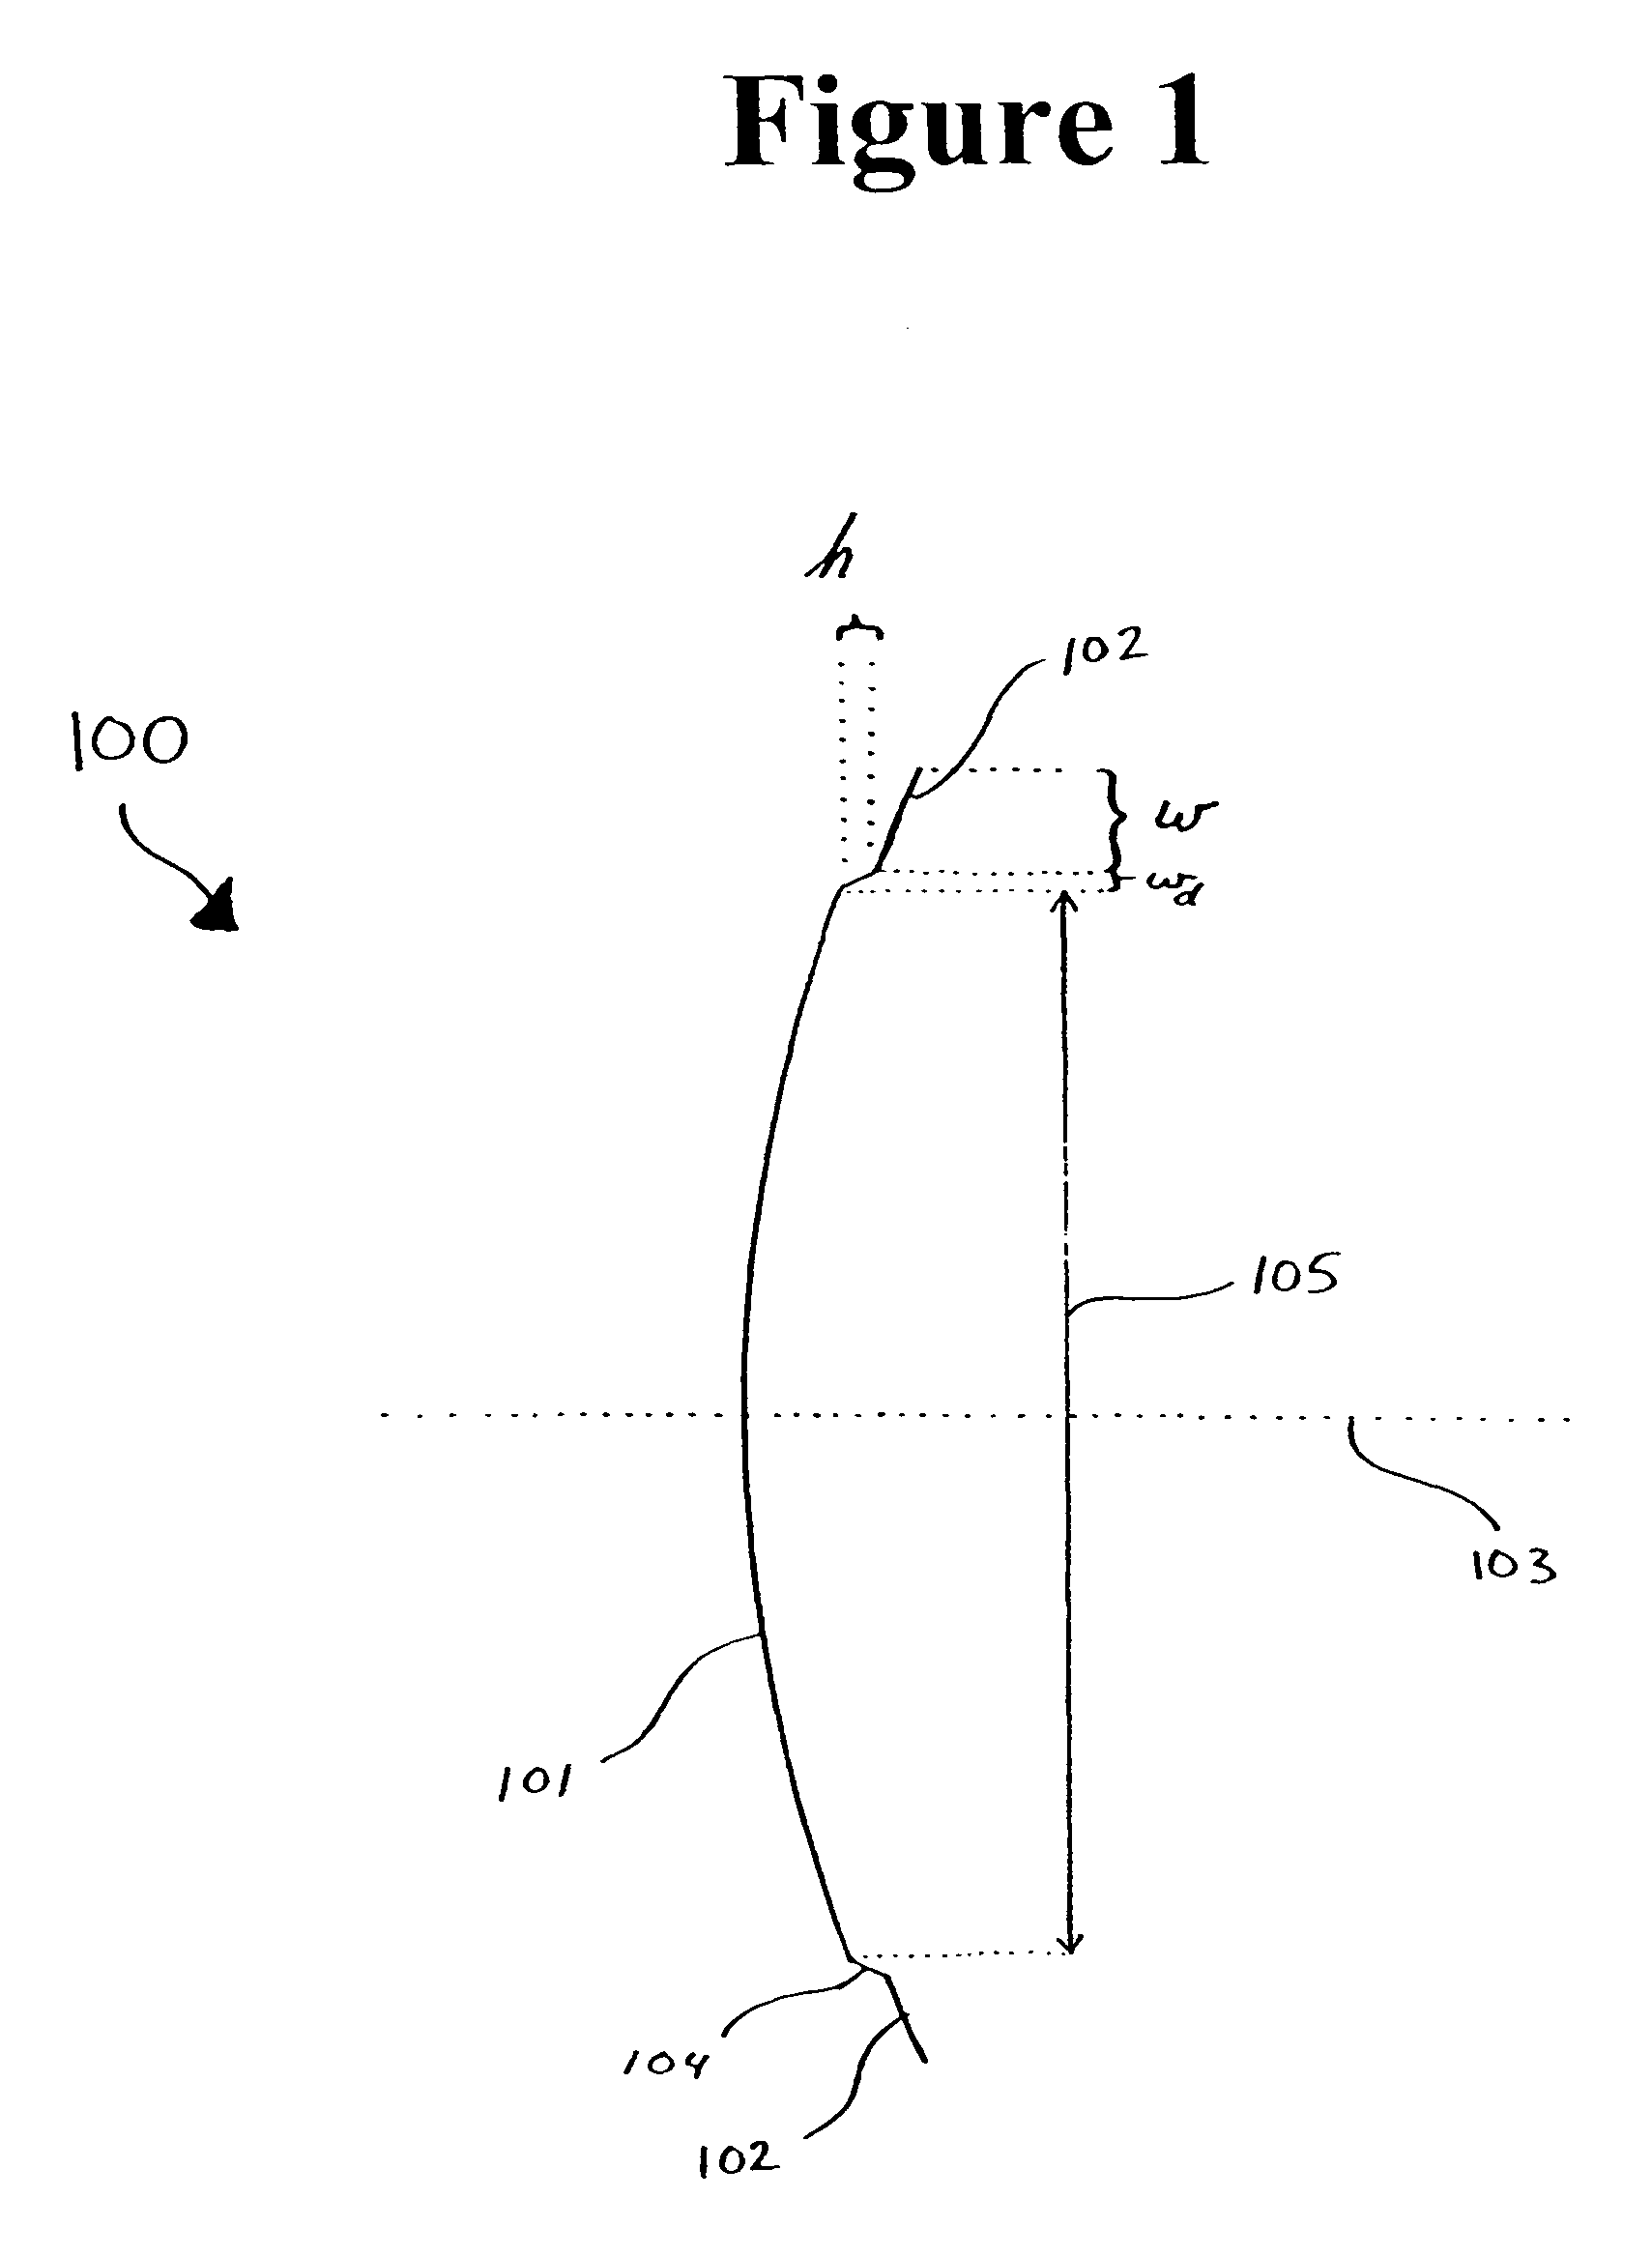 Stepped-reflector antenna for satellite communication payloads